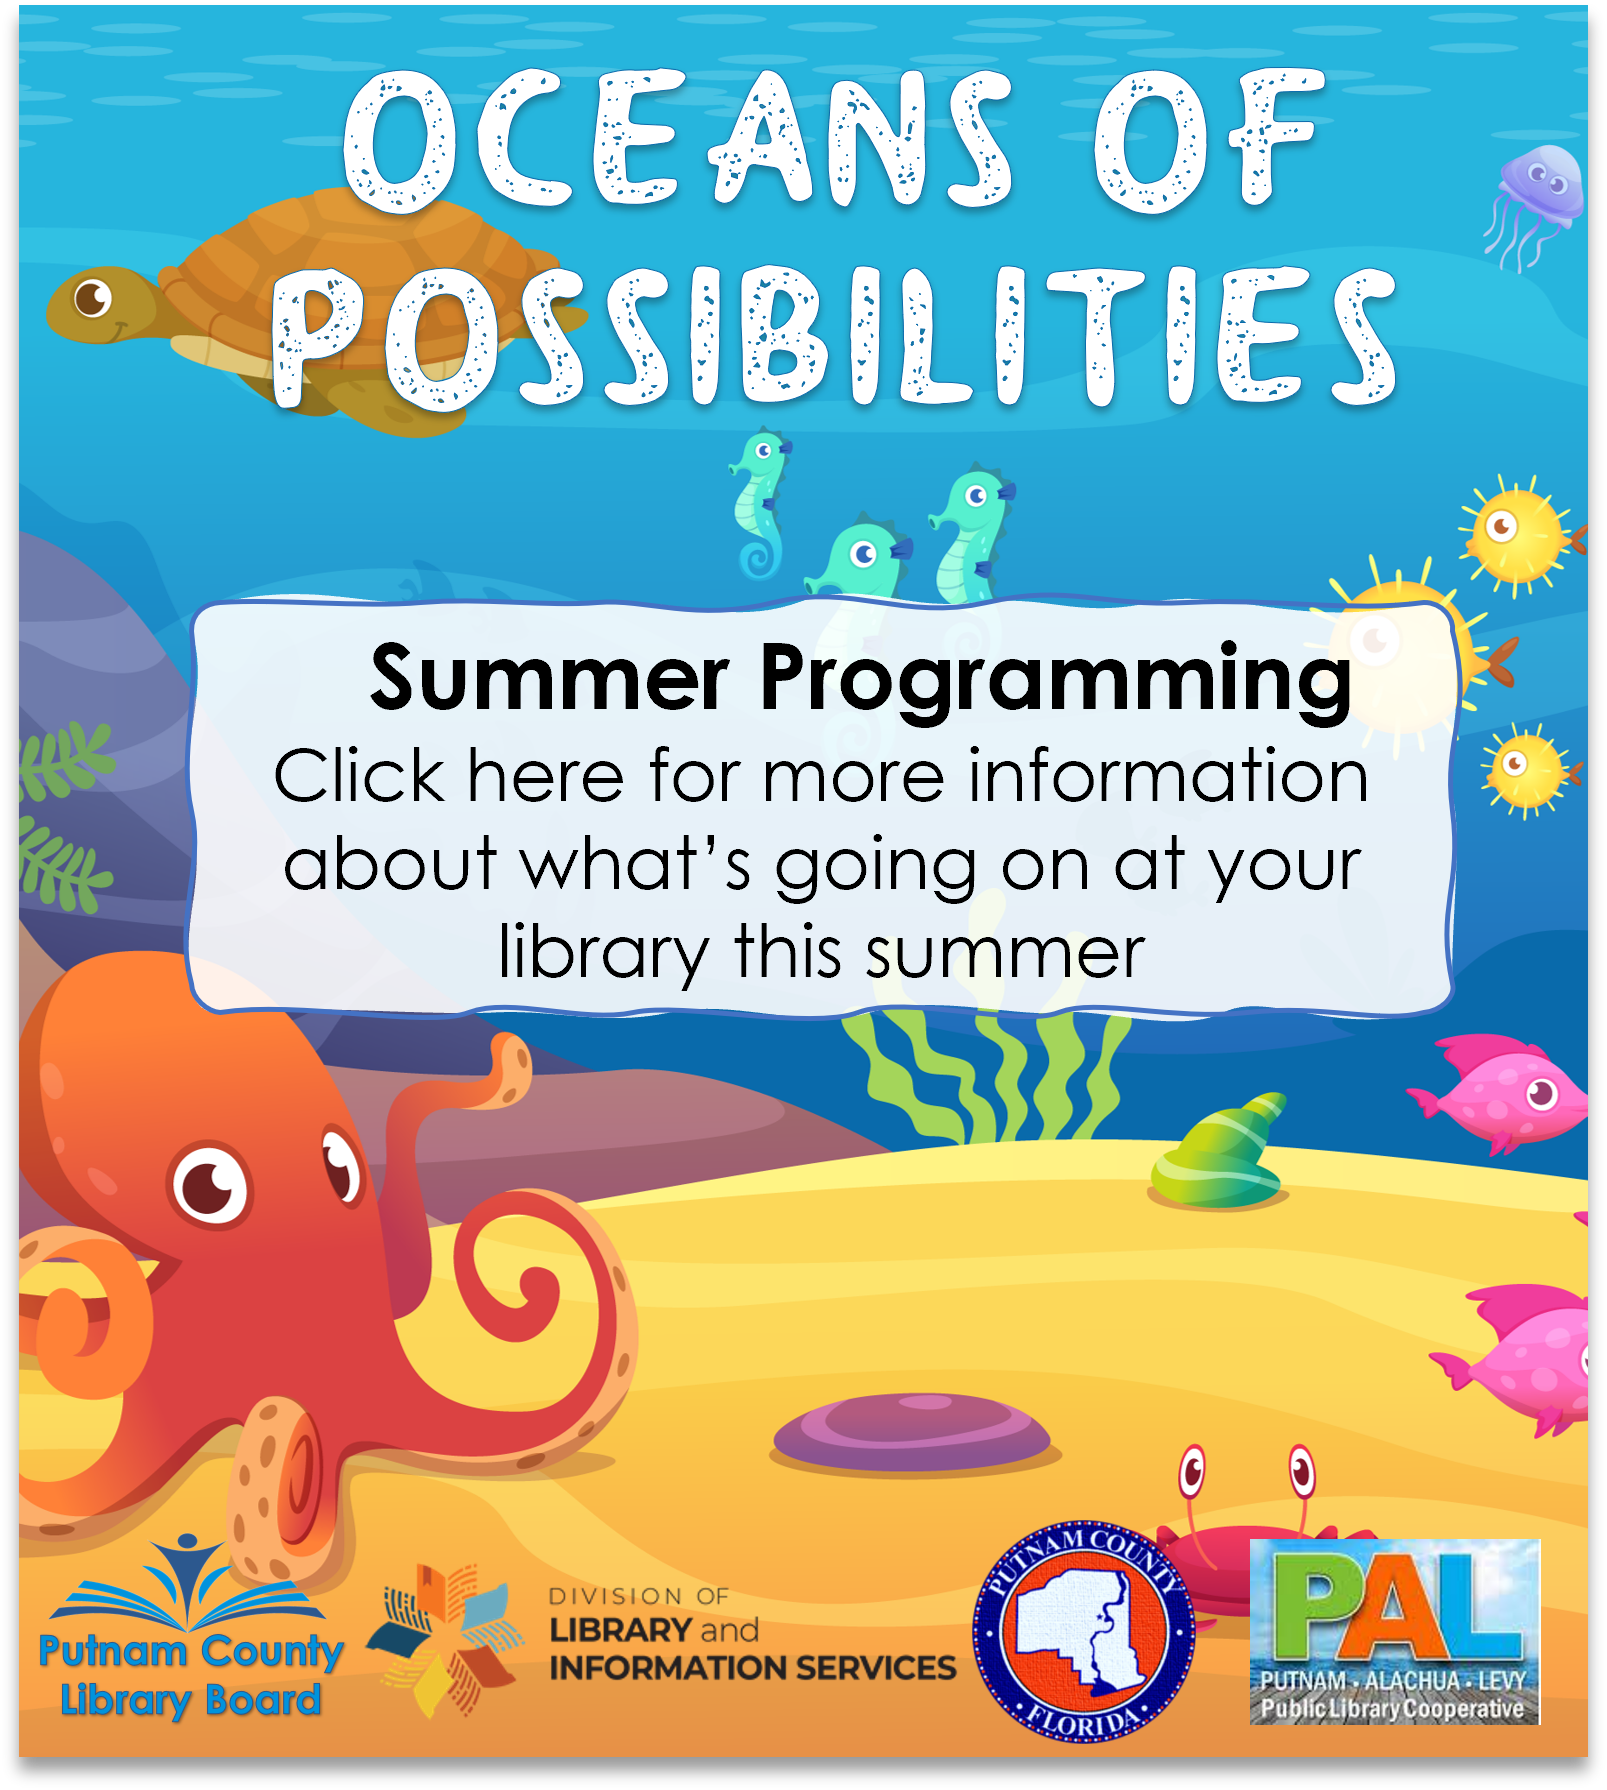 Click here for information about summer programming at your Putnam County Libraries.